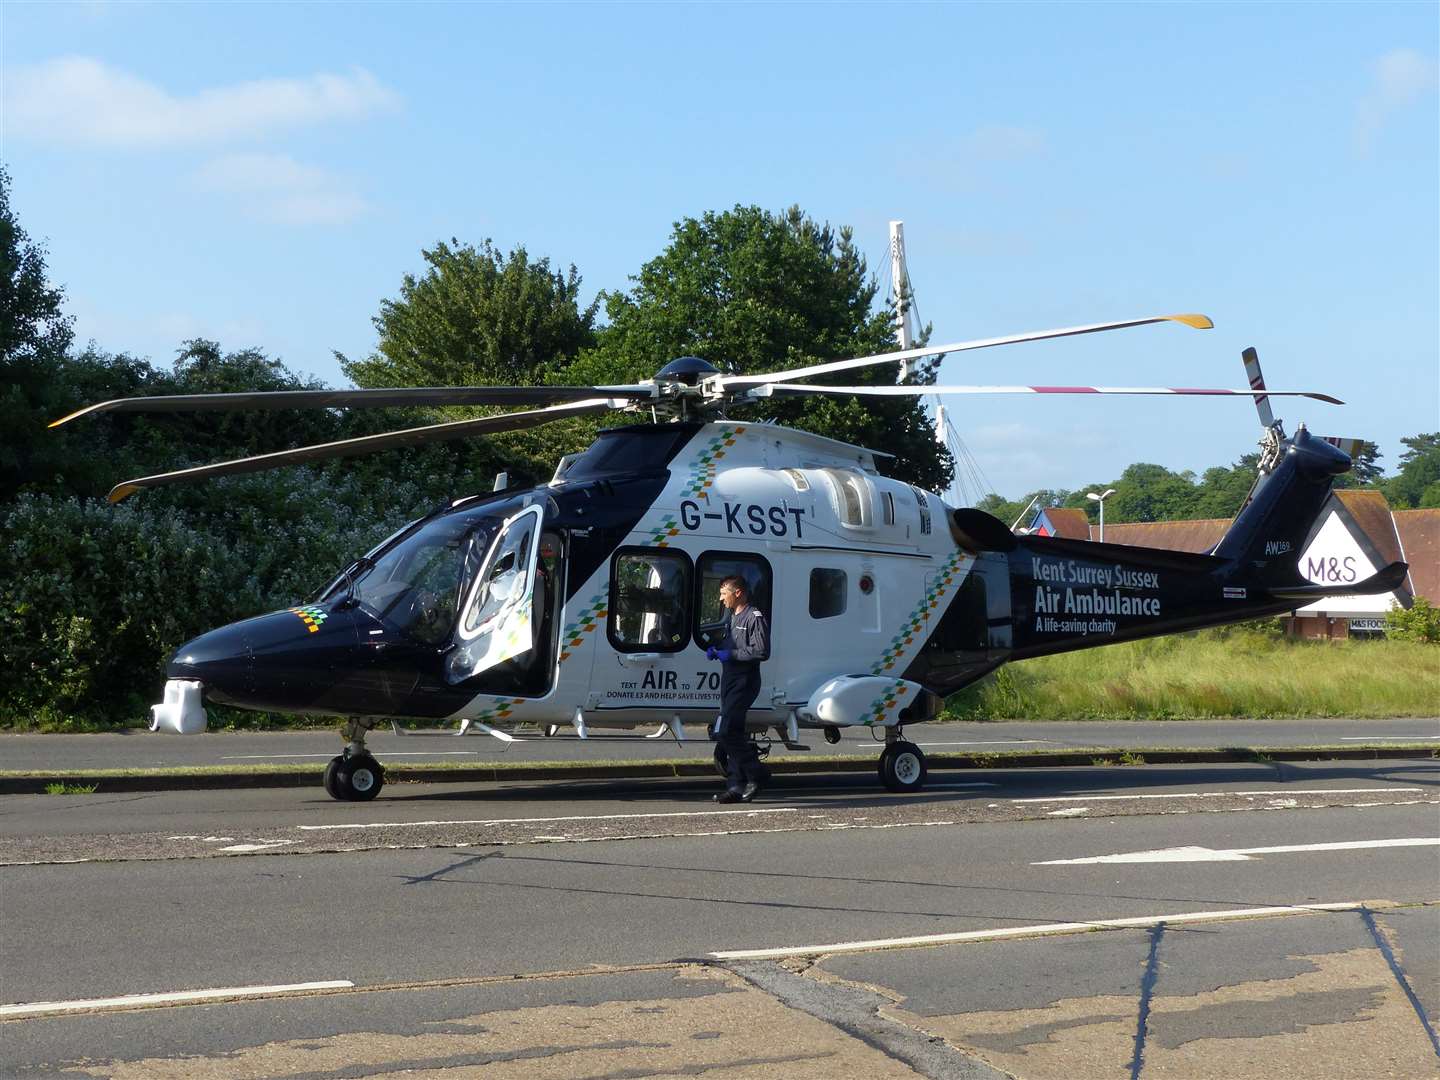 Andy Clark submitted these images of the air ambulance at Simone Weil Avenue, Ashford (2462533)